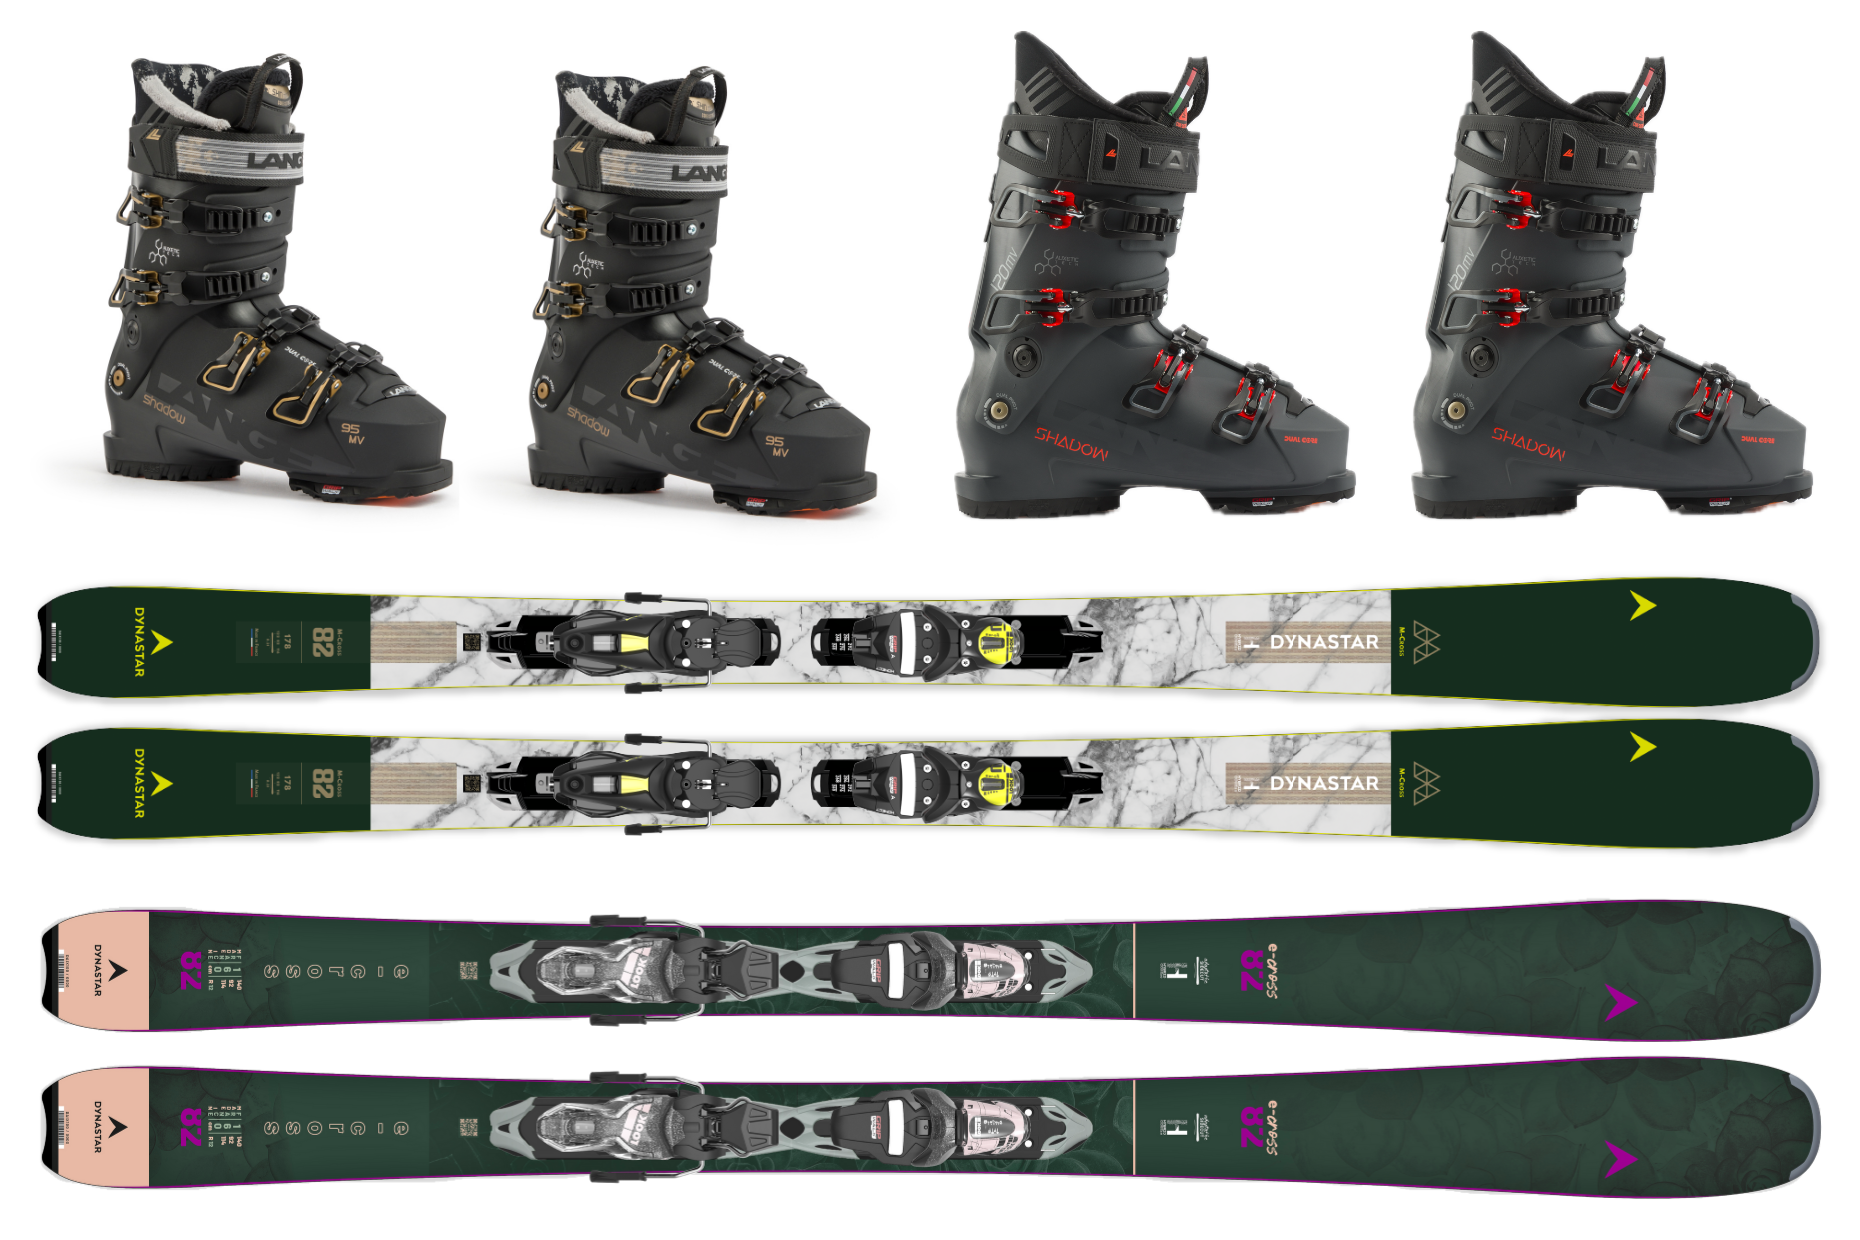 2 sets of Dynastar skis and 2 pairs of Lange boots up for grabs in competition